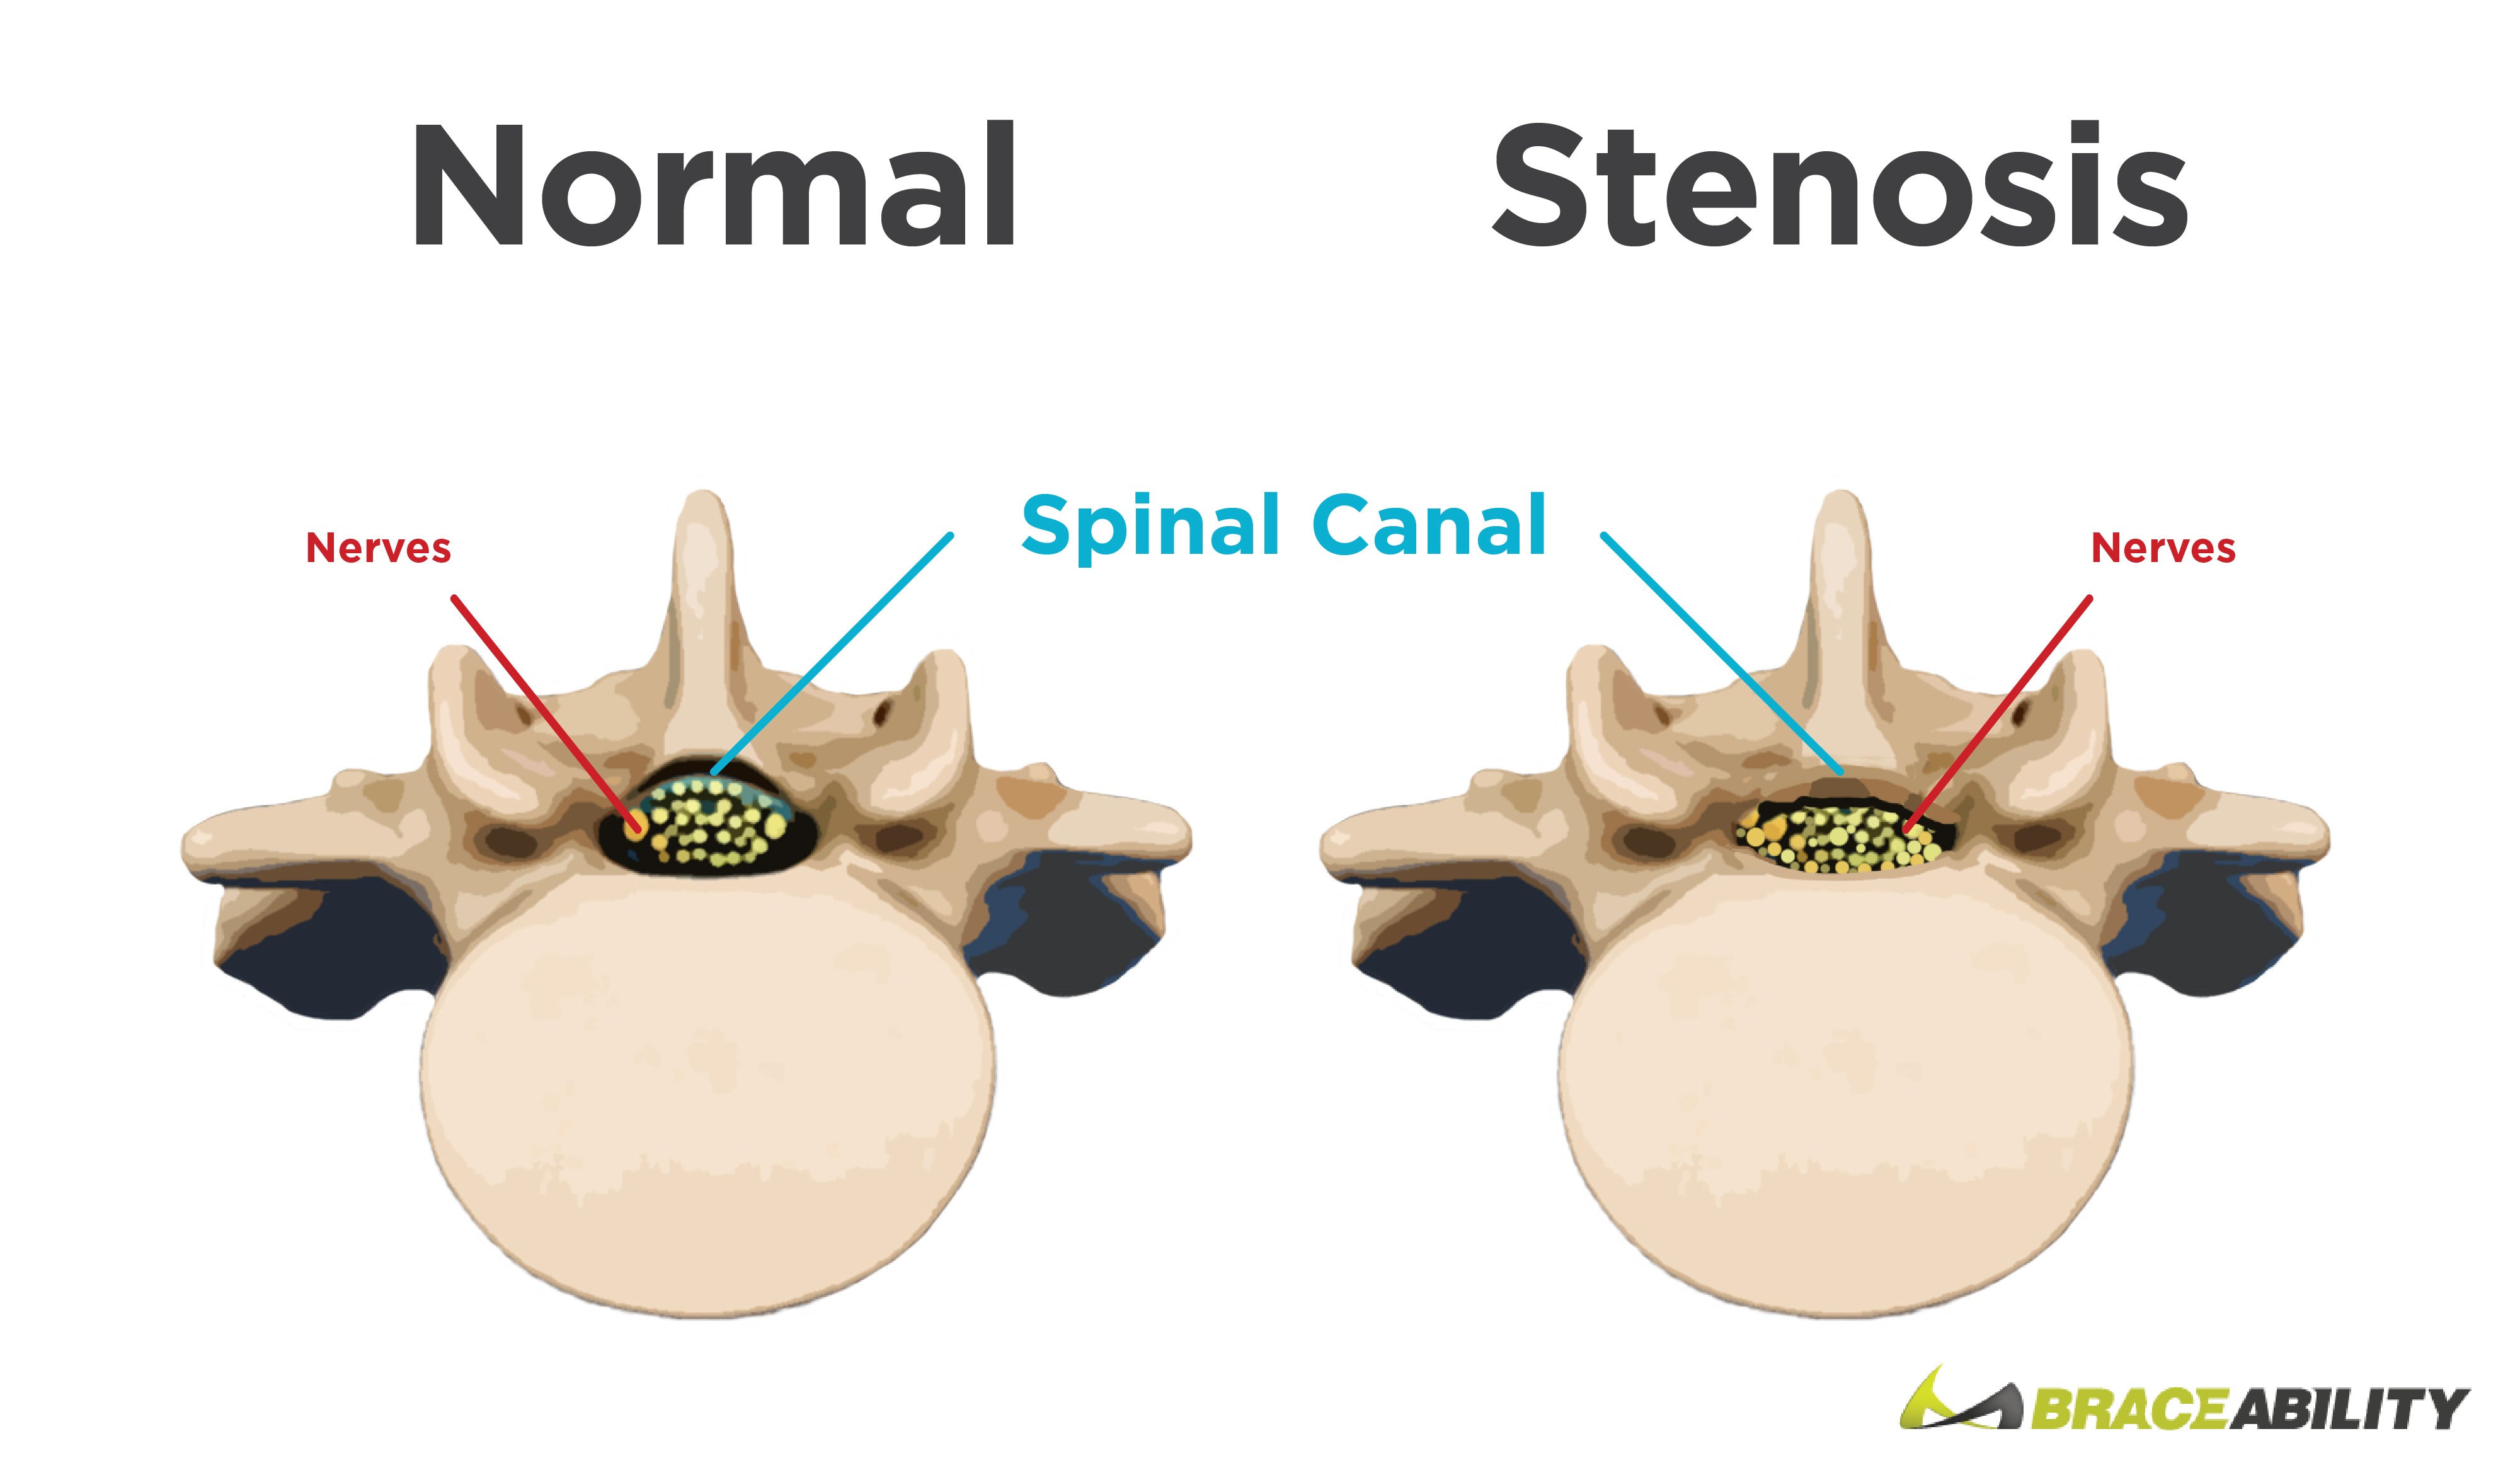 spinal stenosis is caused by the narrowing of the spinal canal